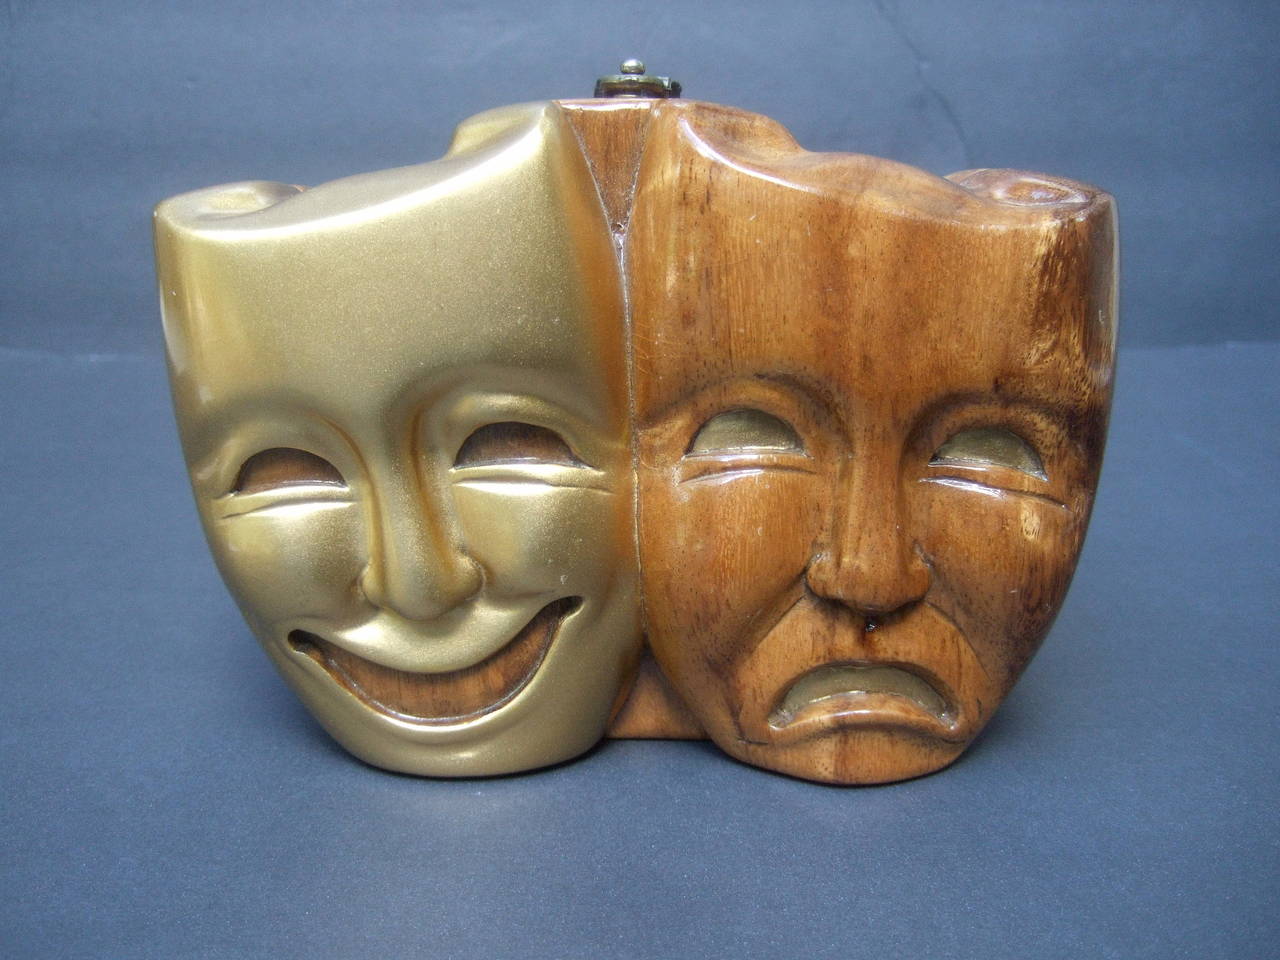 Timmy Woods Beverly Hills Theatrical mask artisan handbag
The unique hand carved artisan handbag is designed from
fallen acacia trees in the Philippines. The carved wood masks 
are designed with comedy and tragedy expressions 
  
The masks are